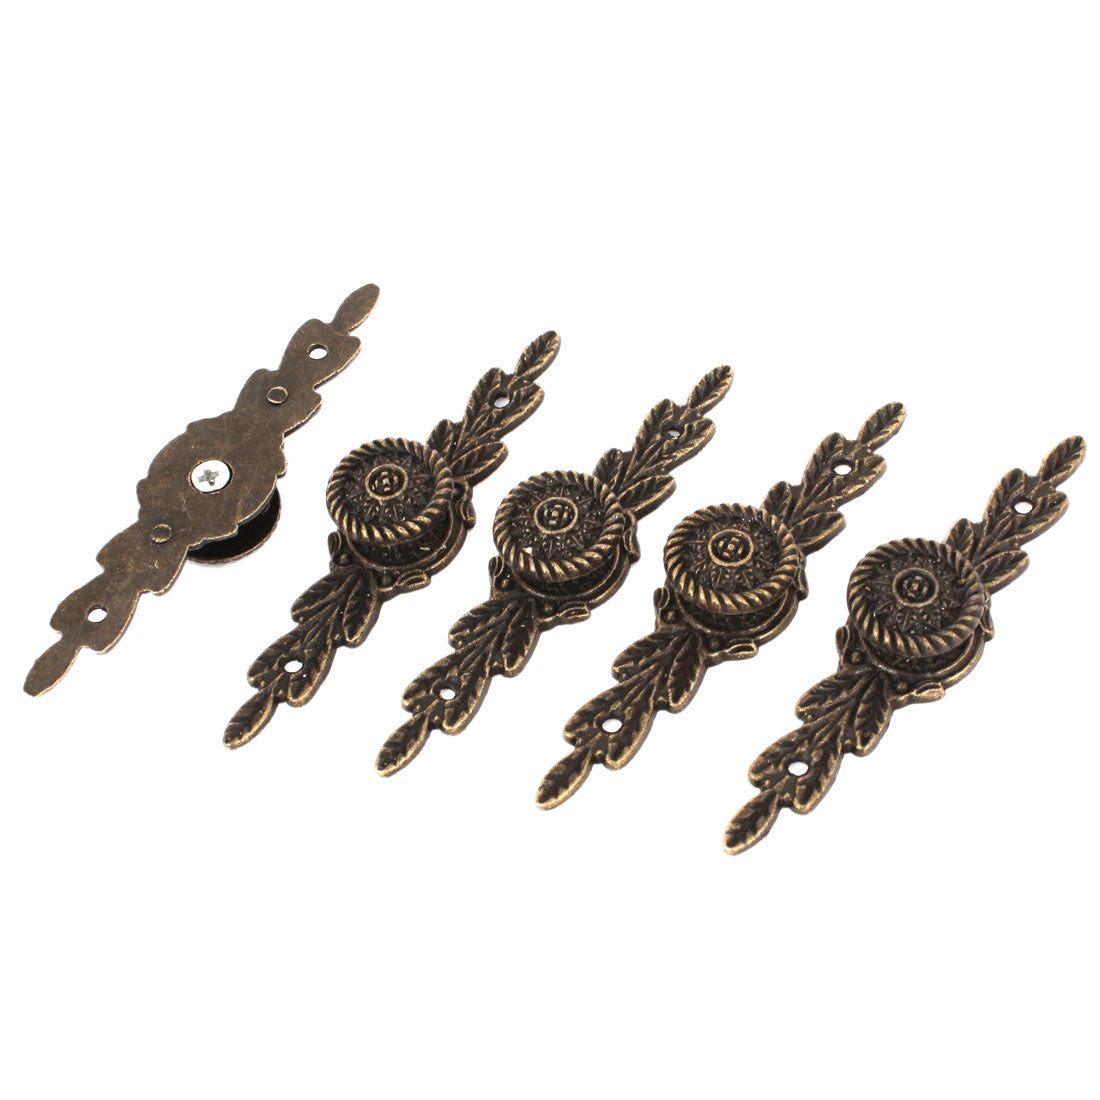 uxcell Uxcell Hardware Drawer Cupboard Door Classical Pull Handle Bronze Tone 5 Pcs w Screws